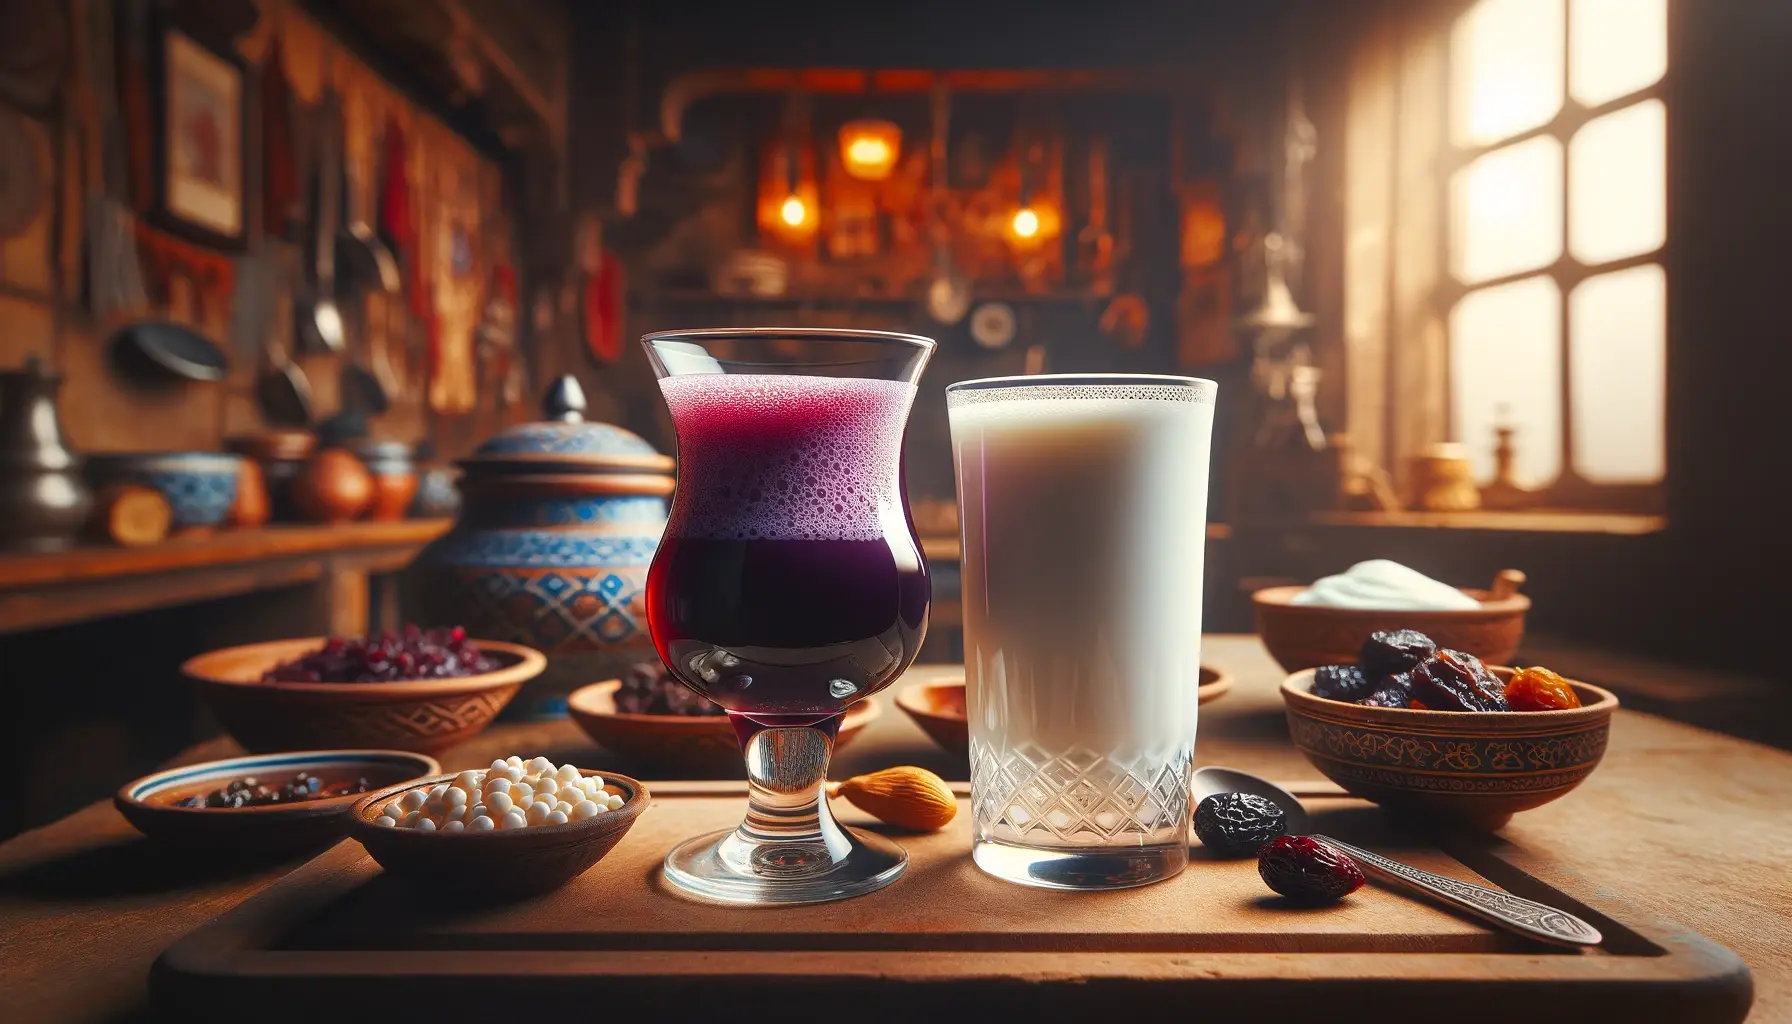 A photograph showcasing a glass of Salgam Suyu and a glass of Ayran (Turkish yogurt drink) side by side, set in a traditional Turkish kitchen